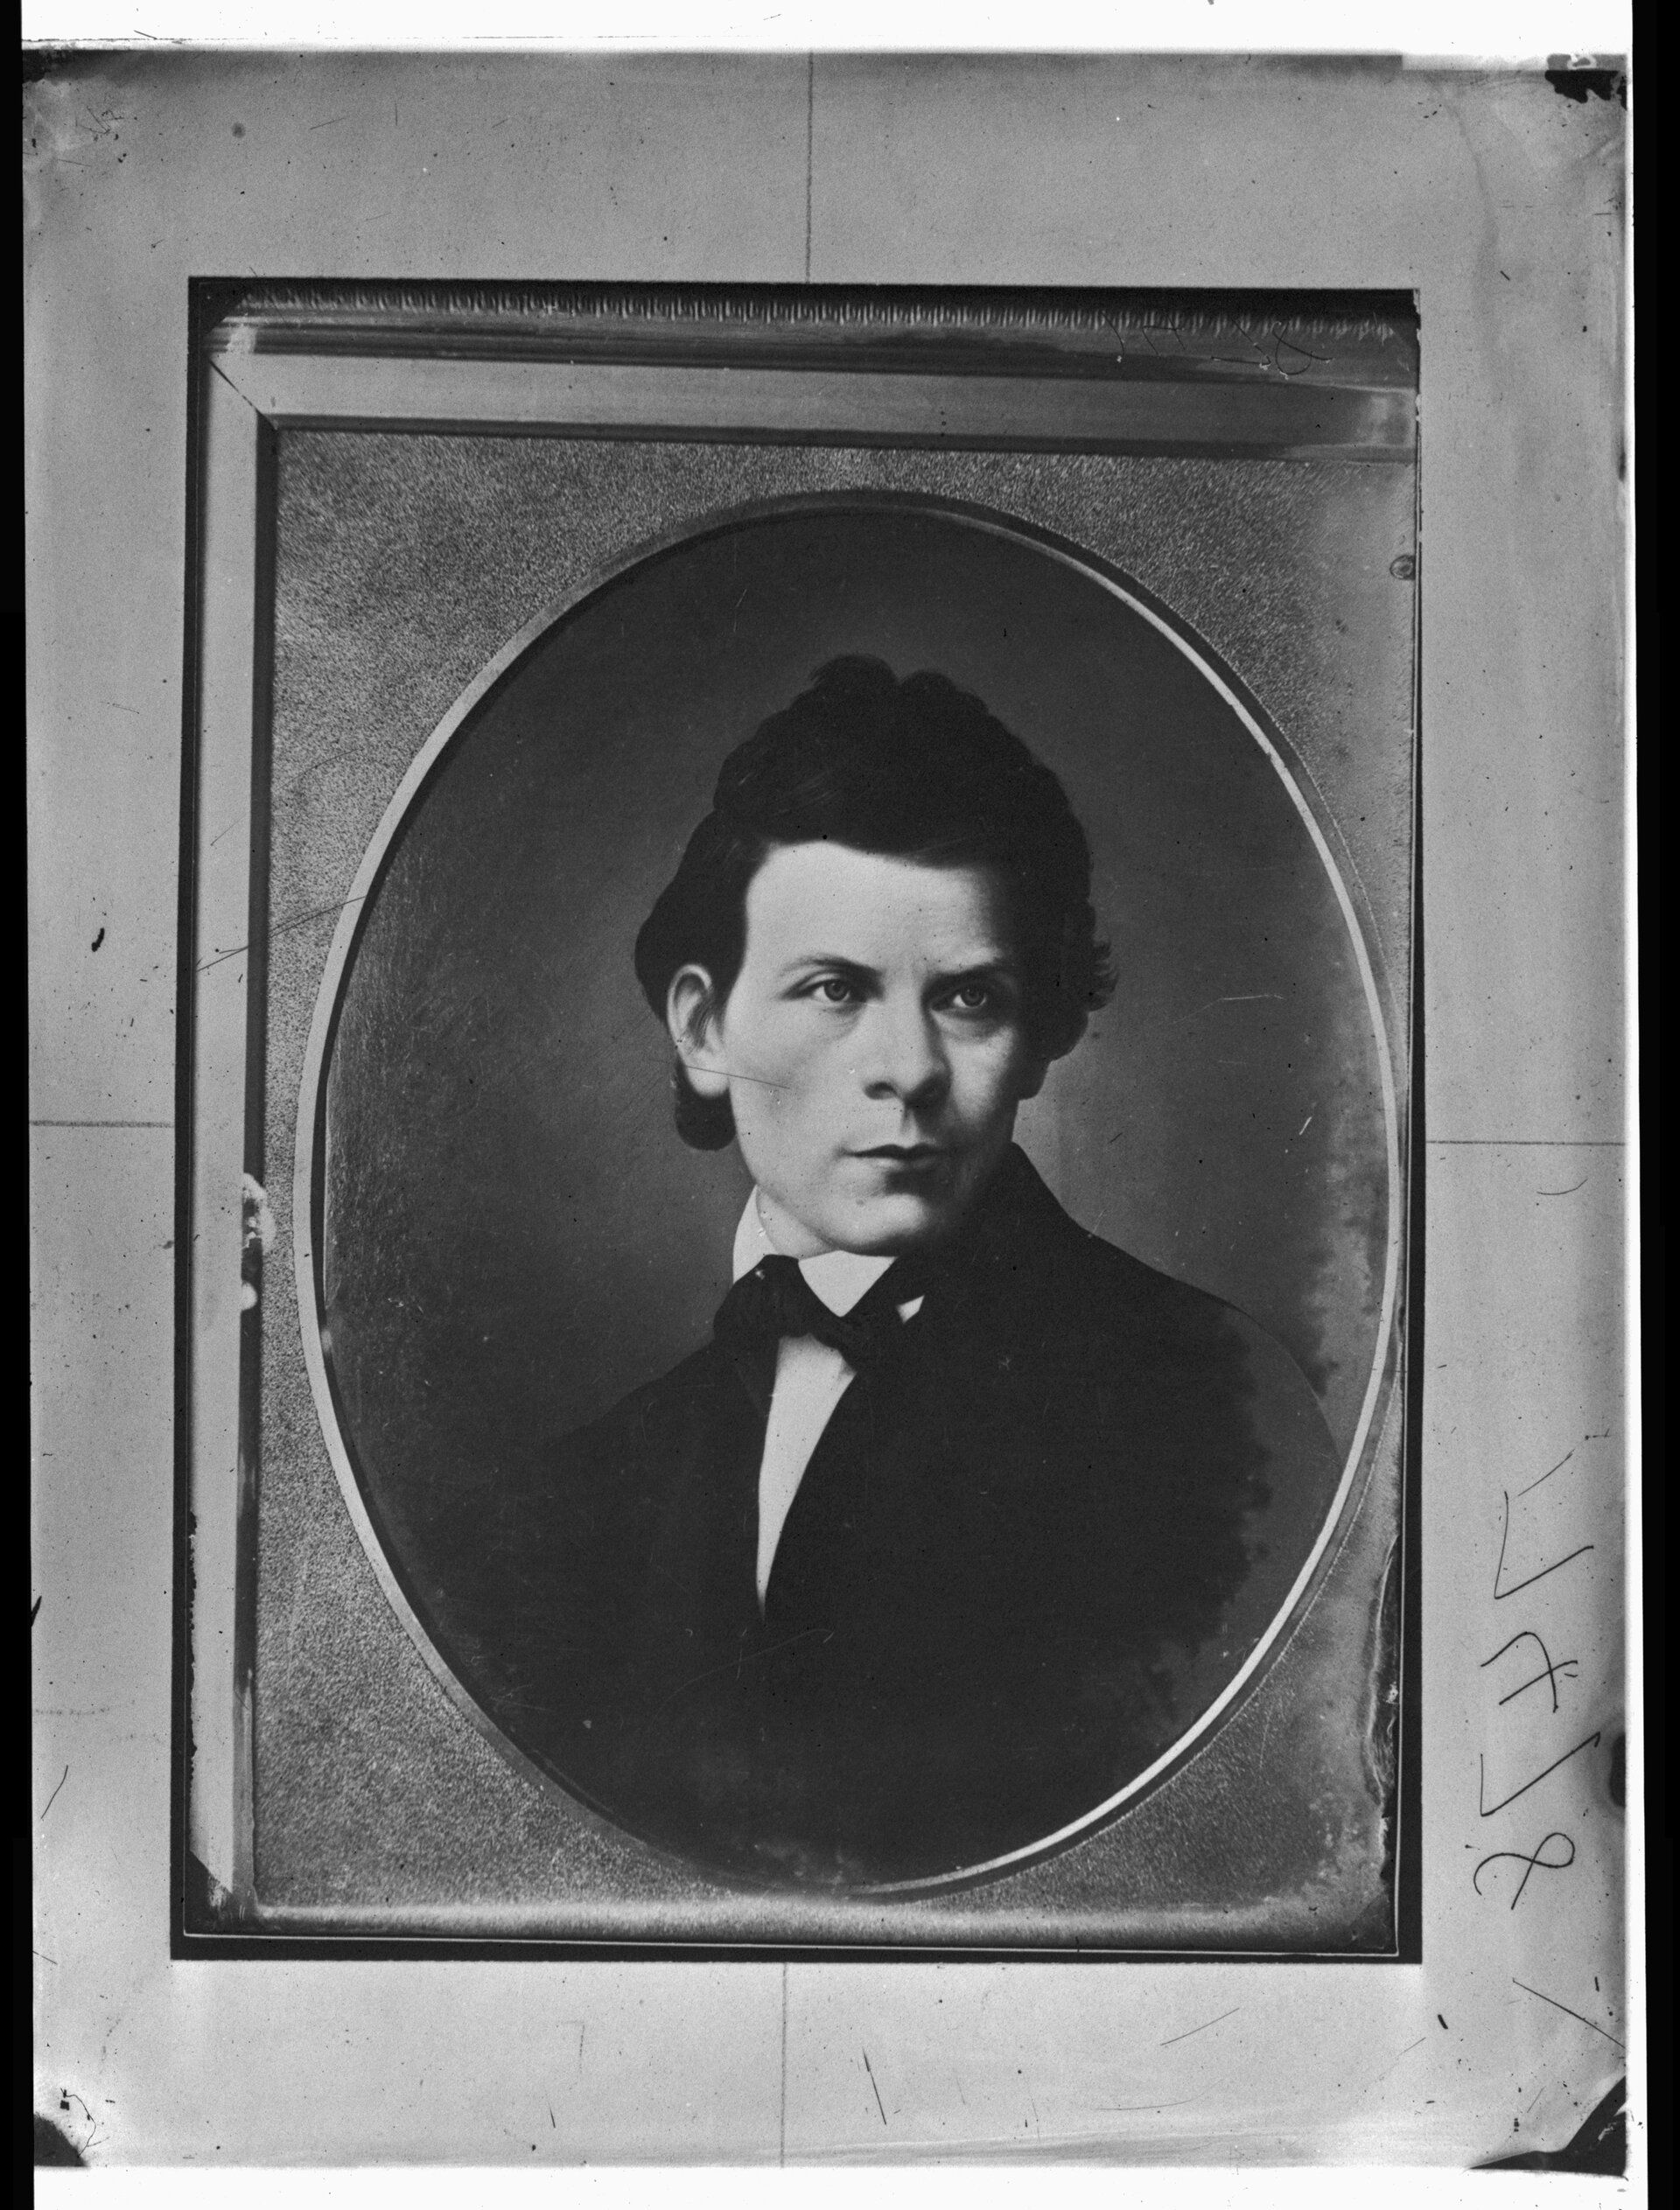 Black and white photo of a portrait of a young man